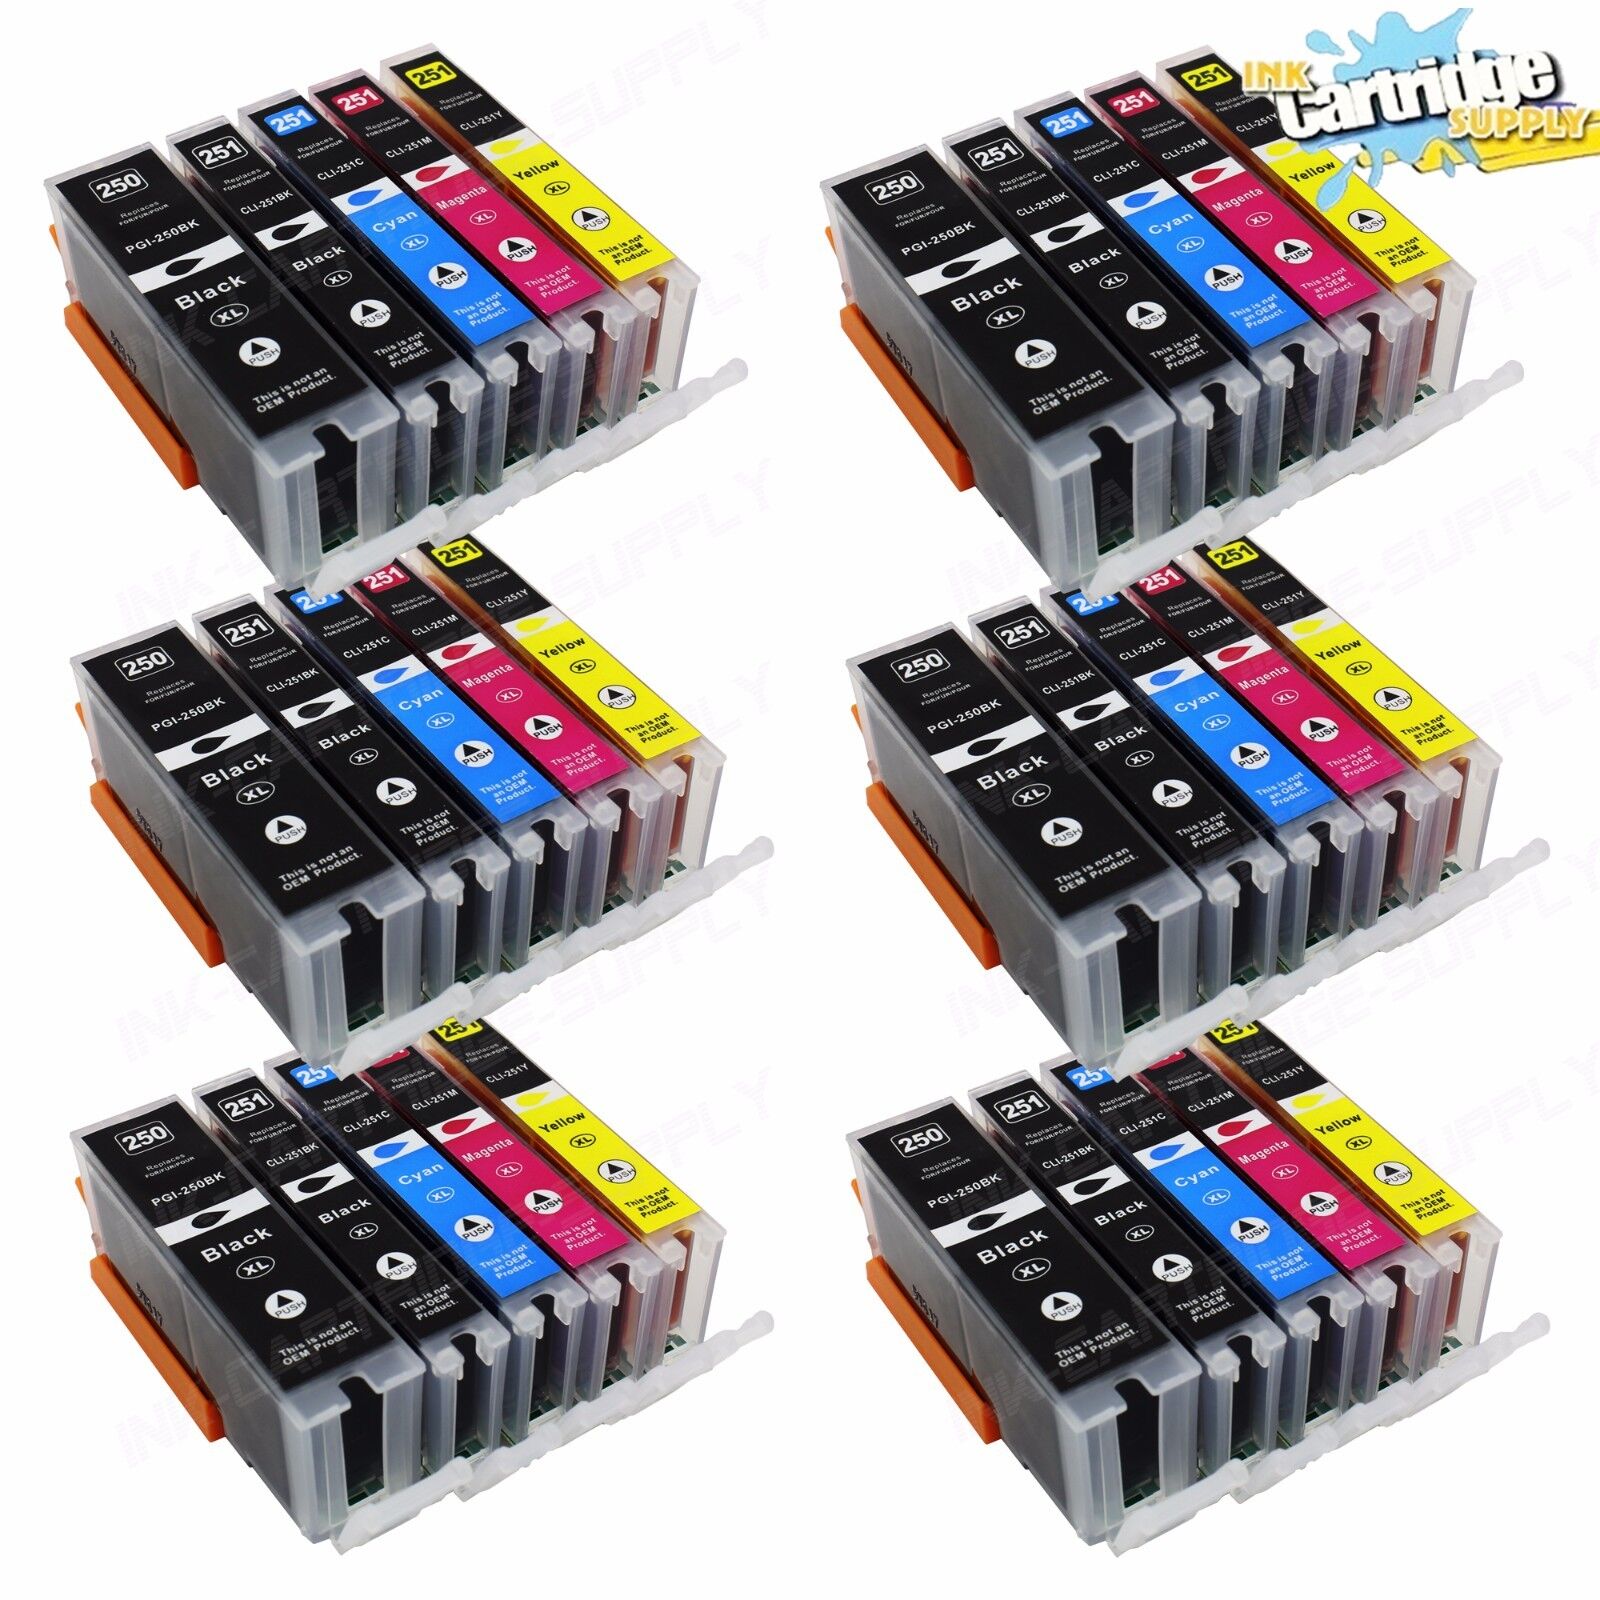 30PK Printer Ink For Canon 250 251 ink For Pixma MG5422 5520 5522 6320 6420 7120